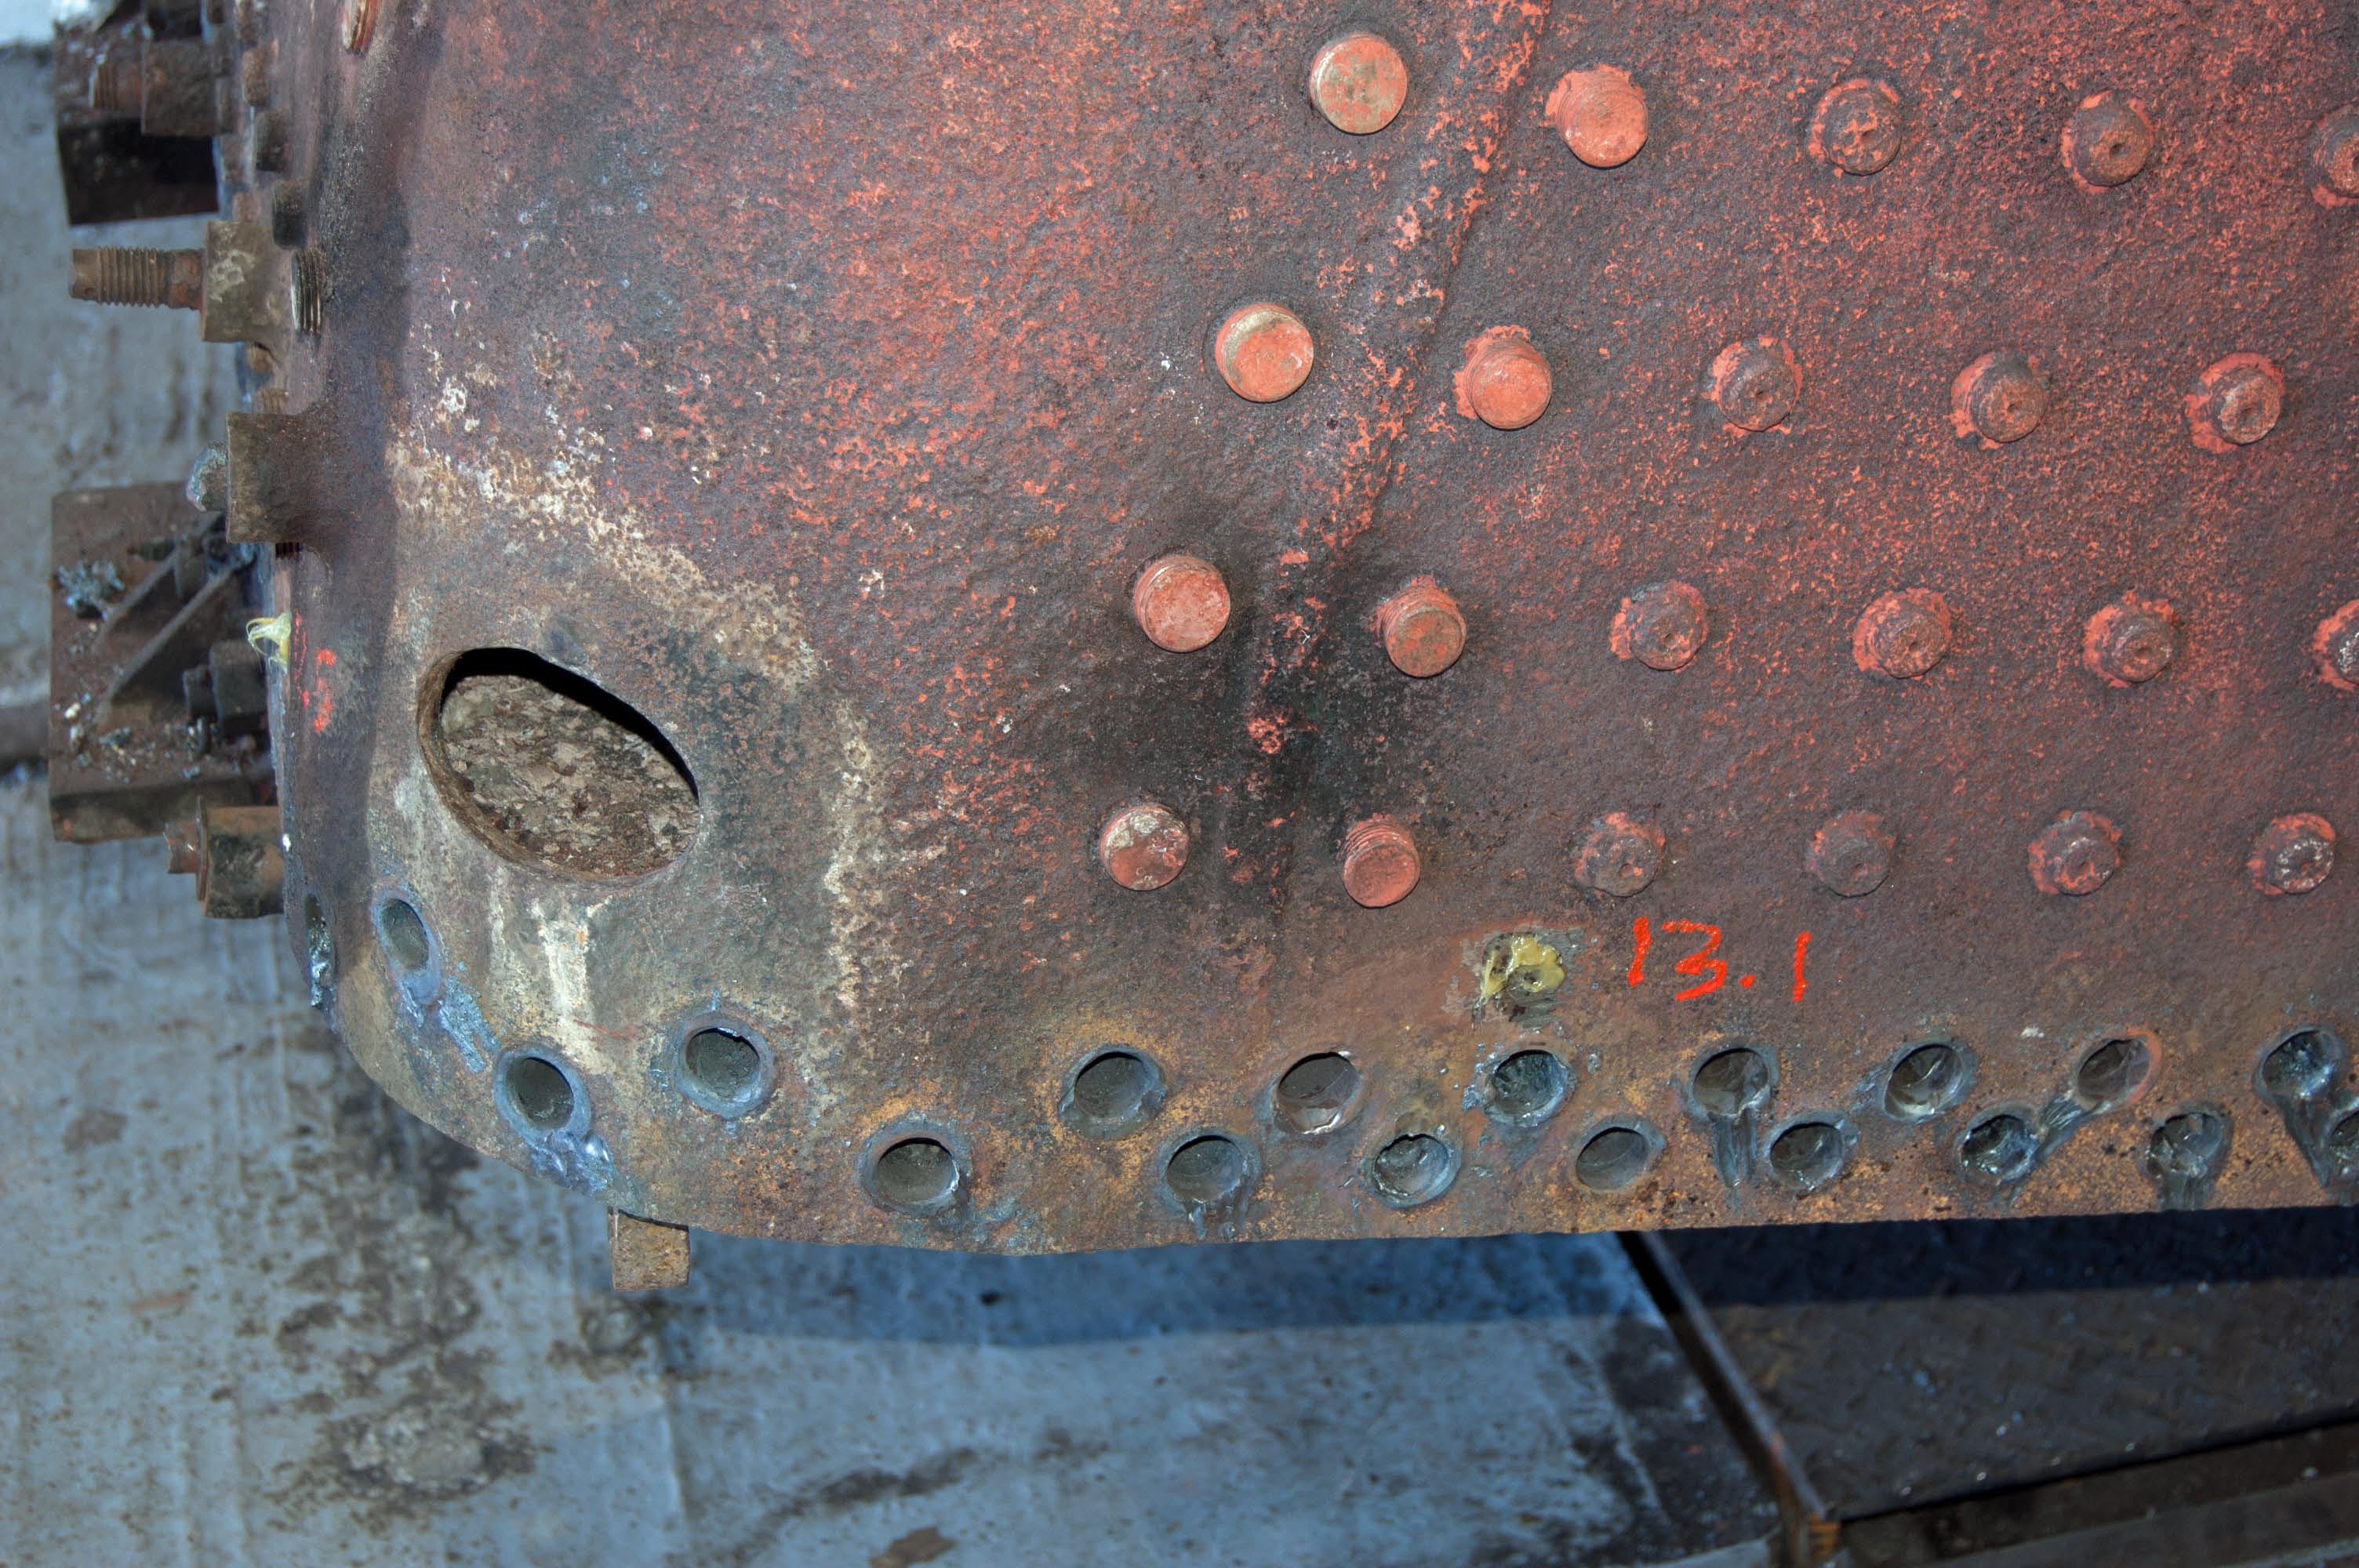 Good progress is being made on burning out the rivets, so that the foundation ring can be taken out